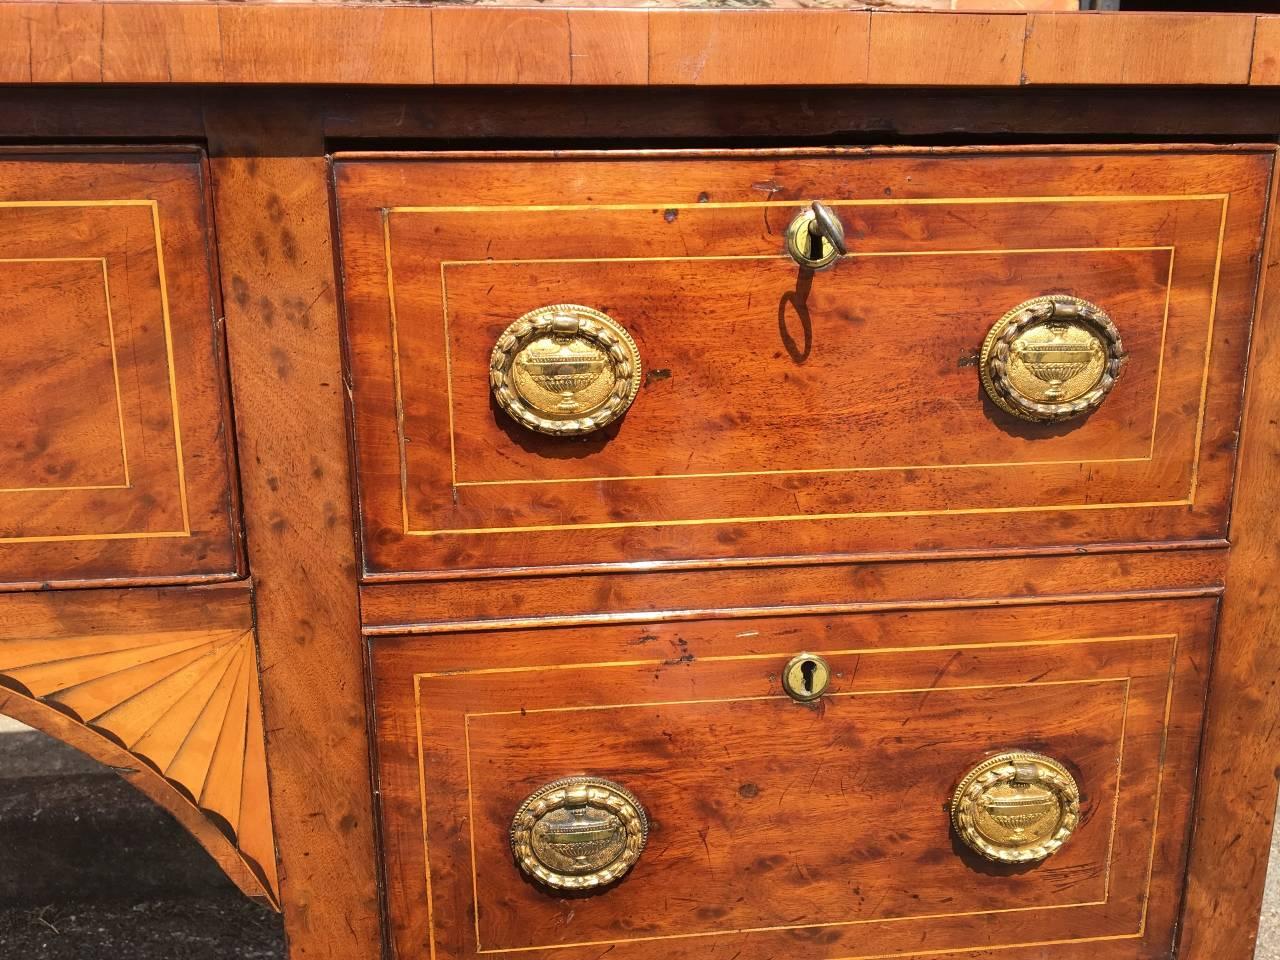 This is an absolutely delightful antique Georgian sideboard, English, circa 1800.The colour and patination is a pleasure to behold. It is such a useful item having plenty of storage and as a Server.
 
There are two drawers on the top left, a single